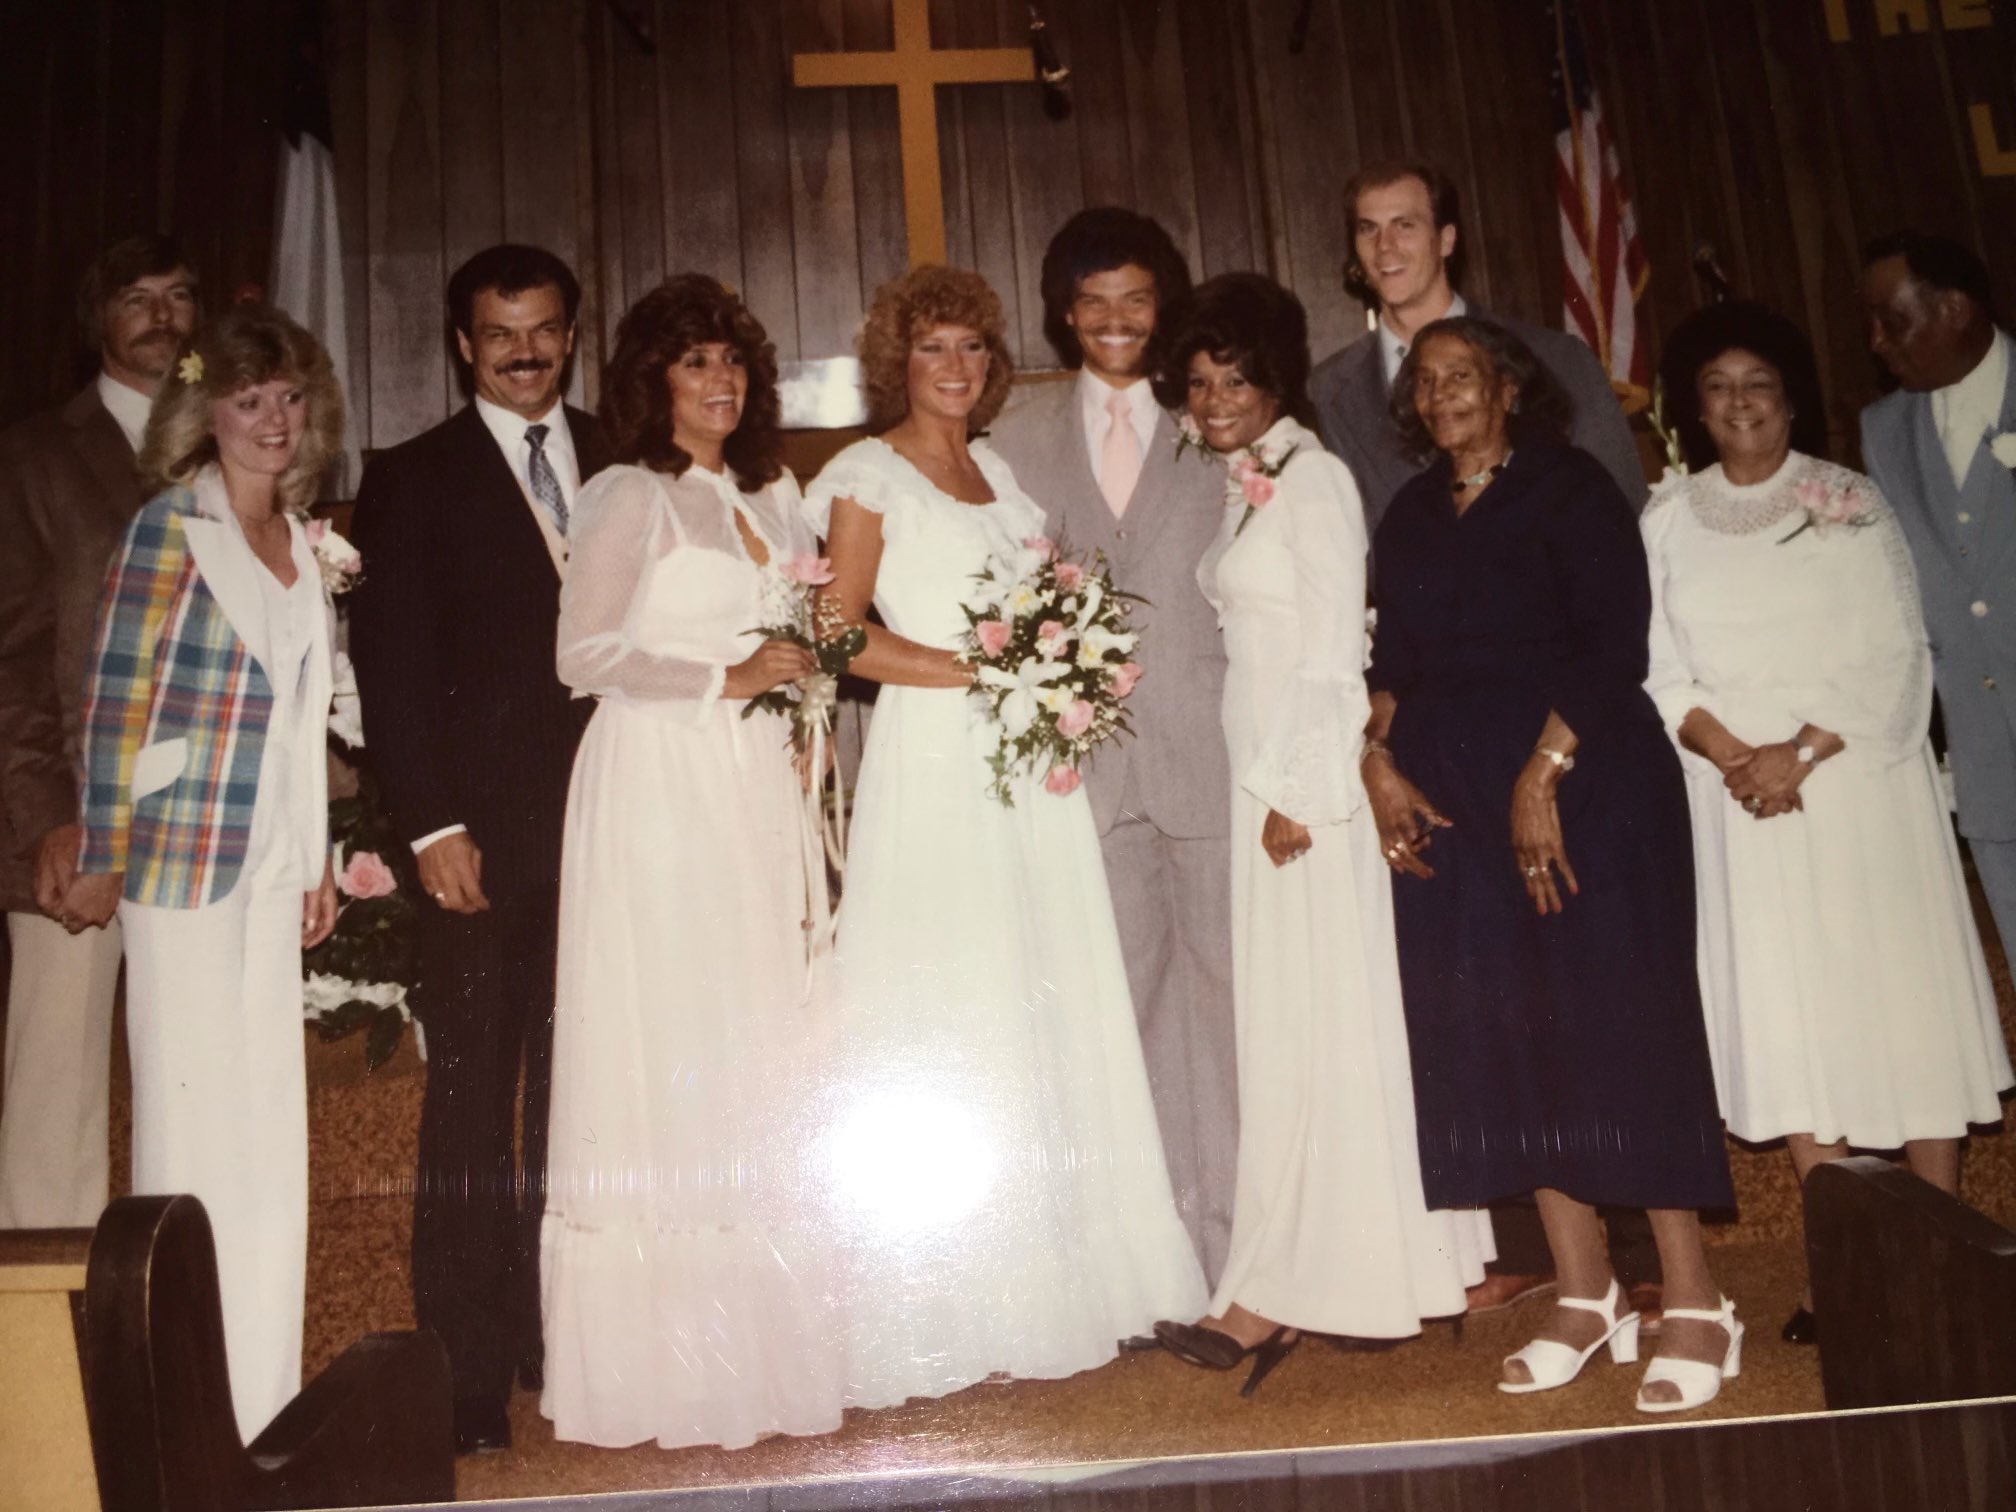 Kali on X: "This photo of Mike McDaniel's parents made my Monday! I have  several cousins that could pass as white or black so it didn't surprise me  to find out his